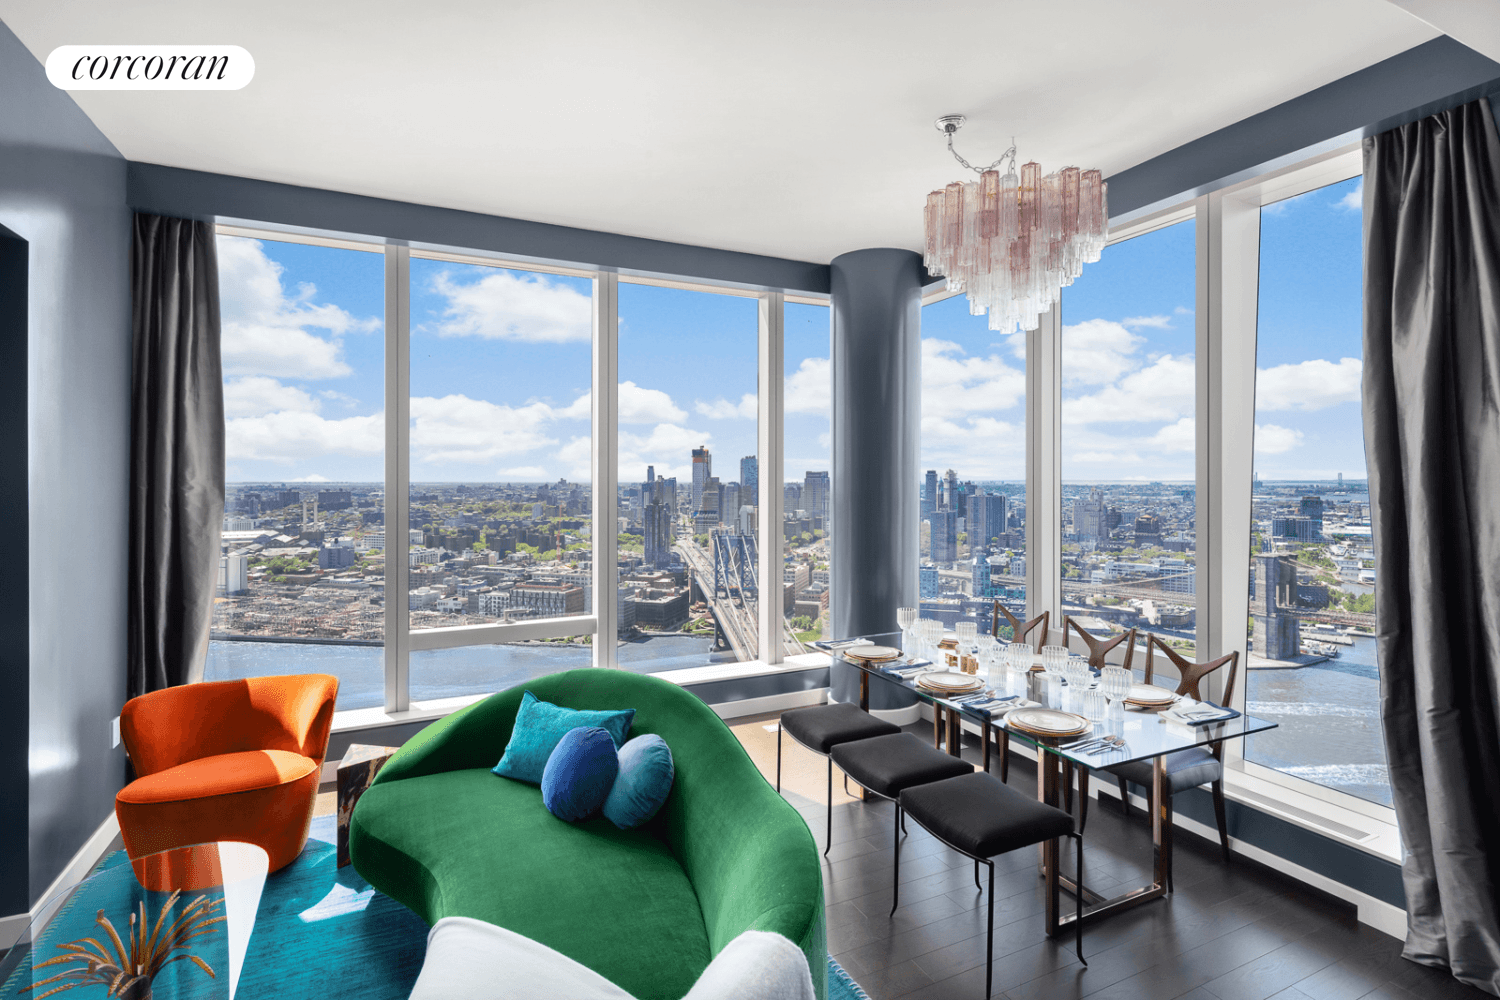 ONE MANHATTAN SQUARE OFFERS ONE OF THE LAST 20 YEAR TAX ABATEMENTS AVAILABLE IN NEW YORK CITYResidence 53C is a 1, 487 square foot three bedroom, three bathroom with an ...